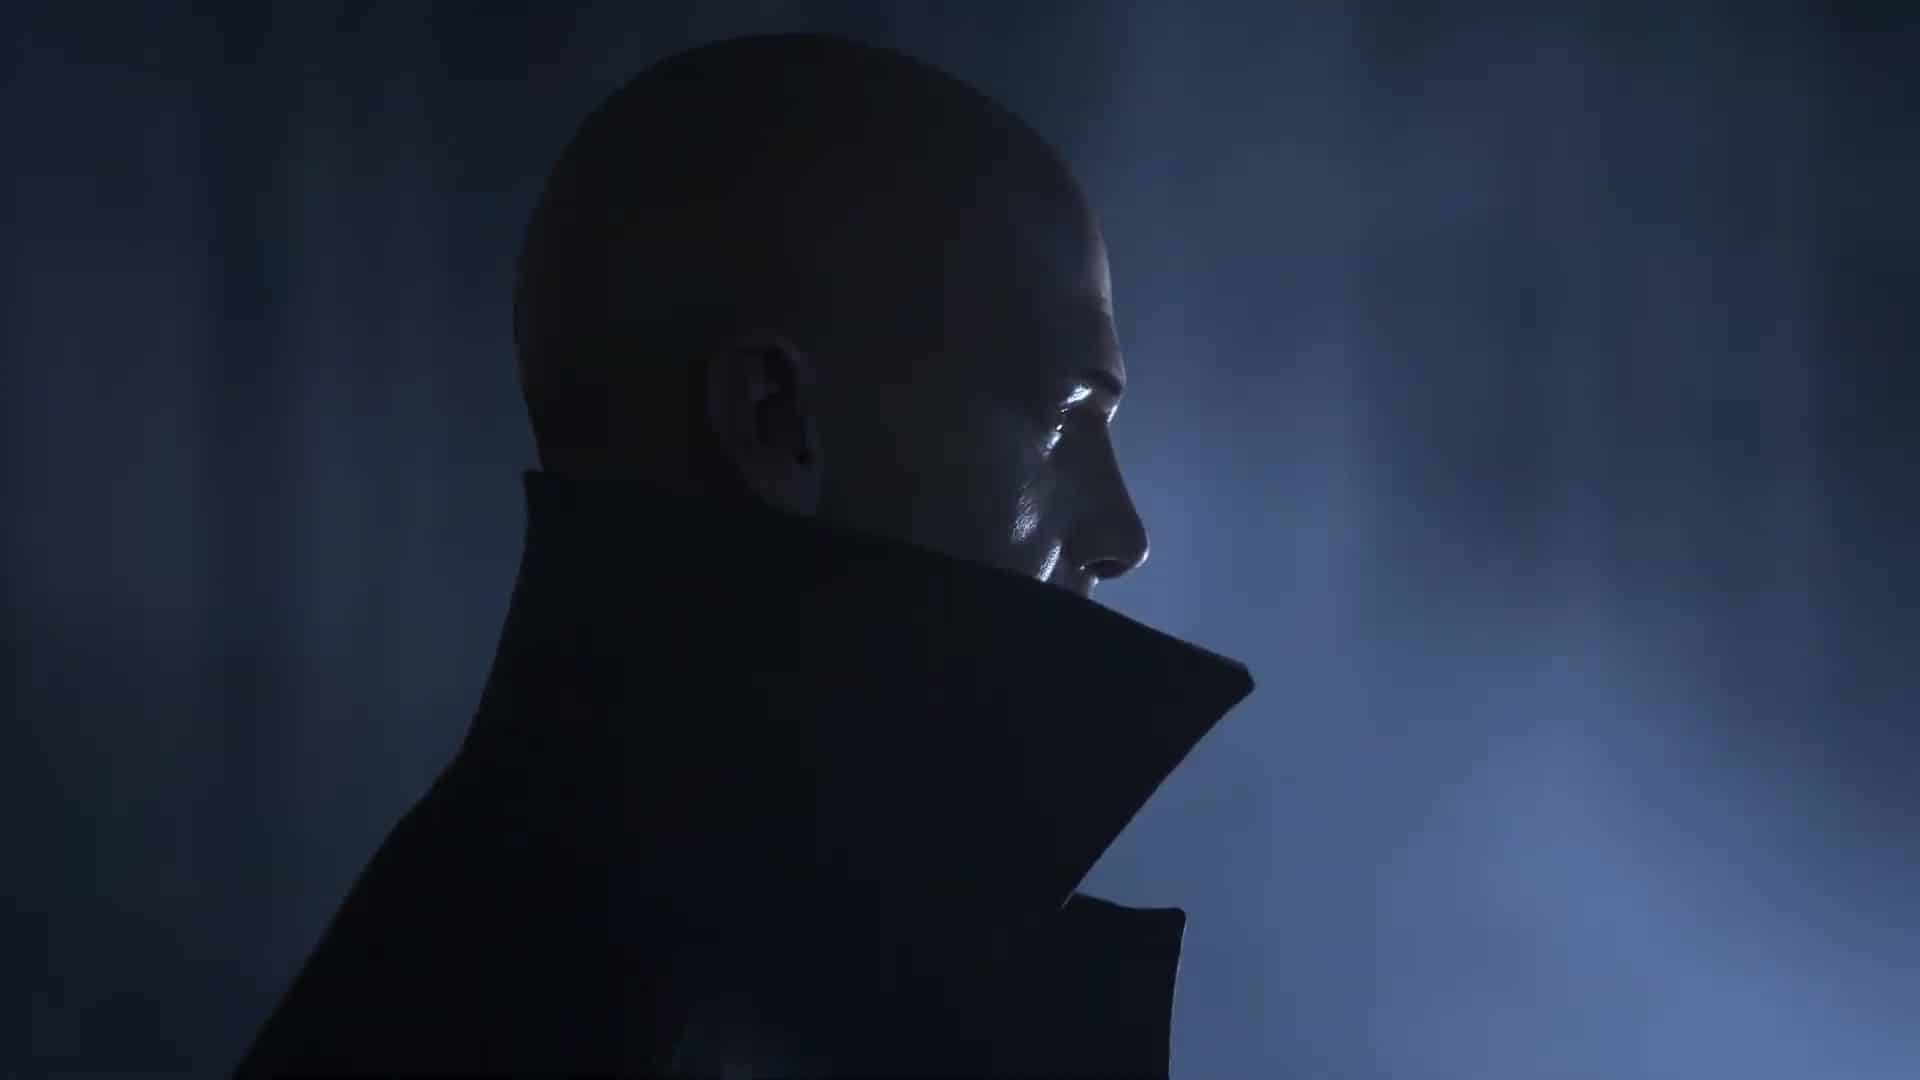 IO Interactive, Hitman 3, next project, new game, world of assassination